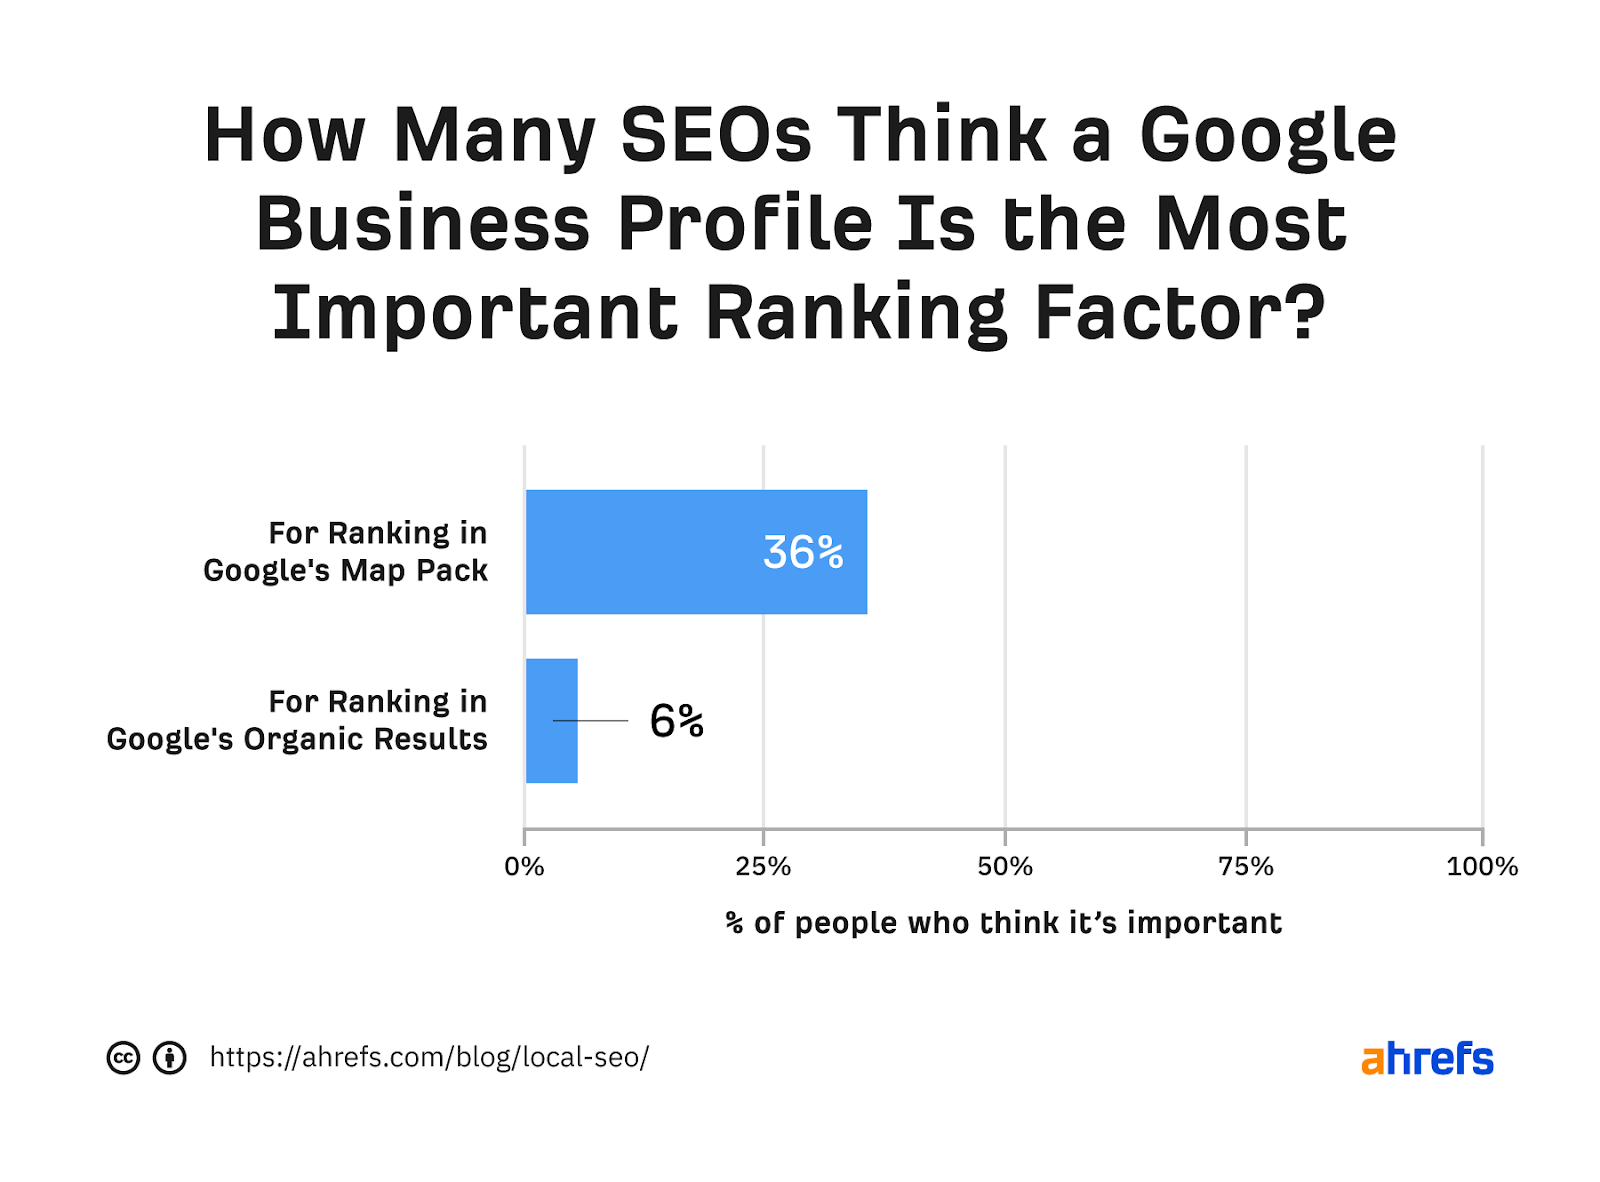 Bar graph showing percentage of SEOs who think GBP is most important ranking factor for 